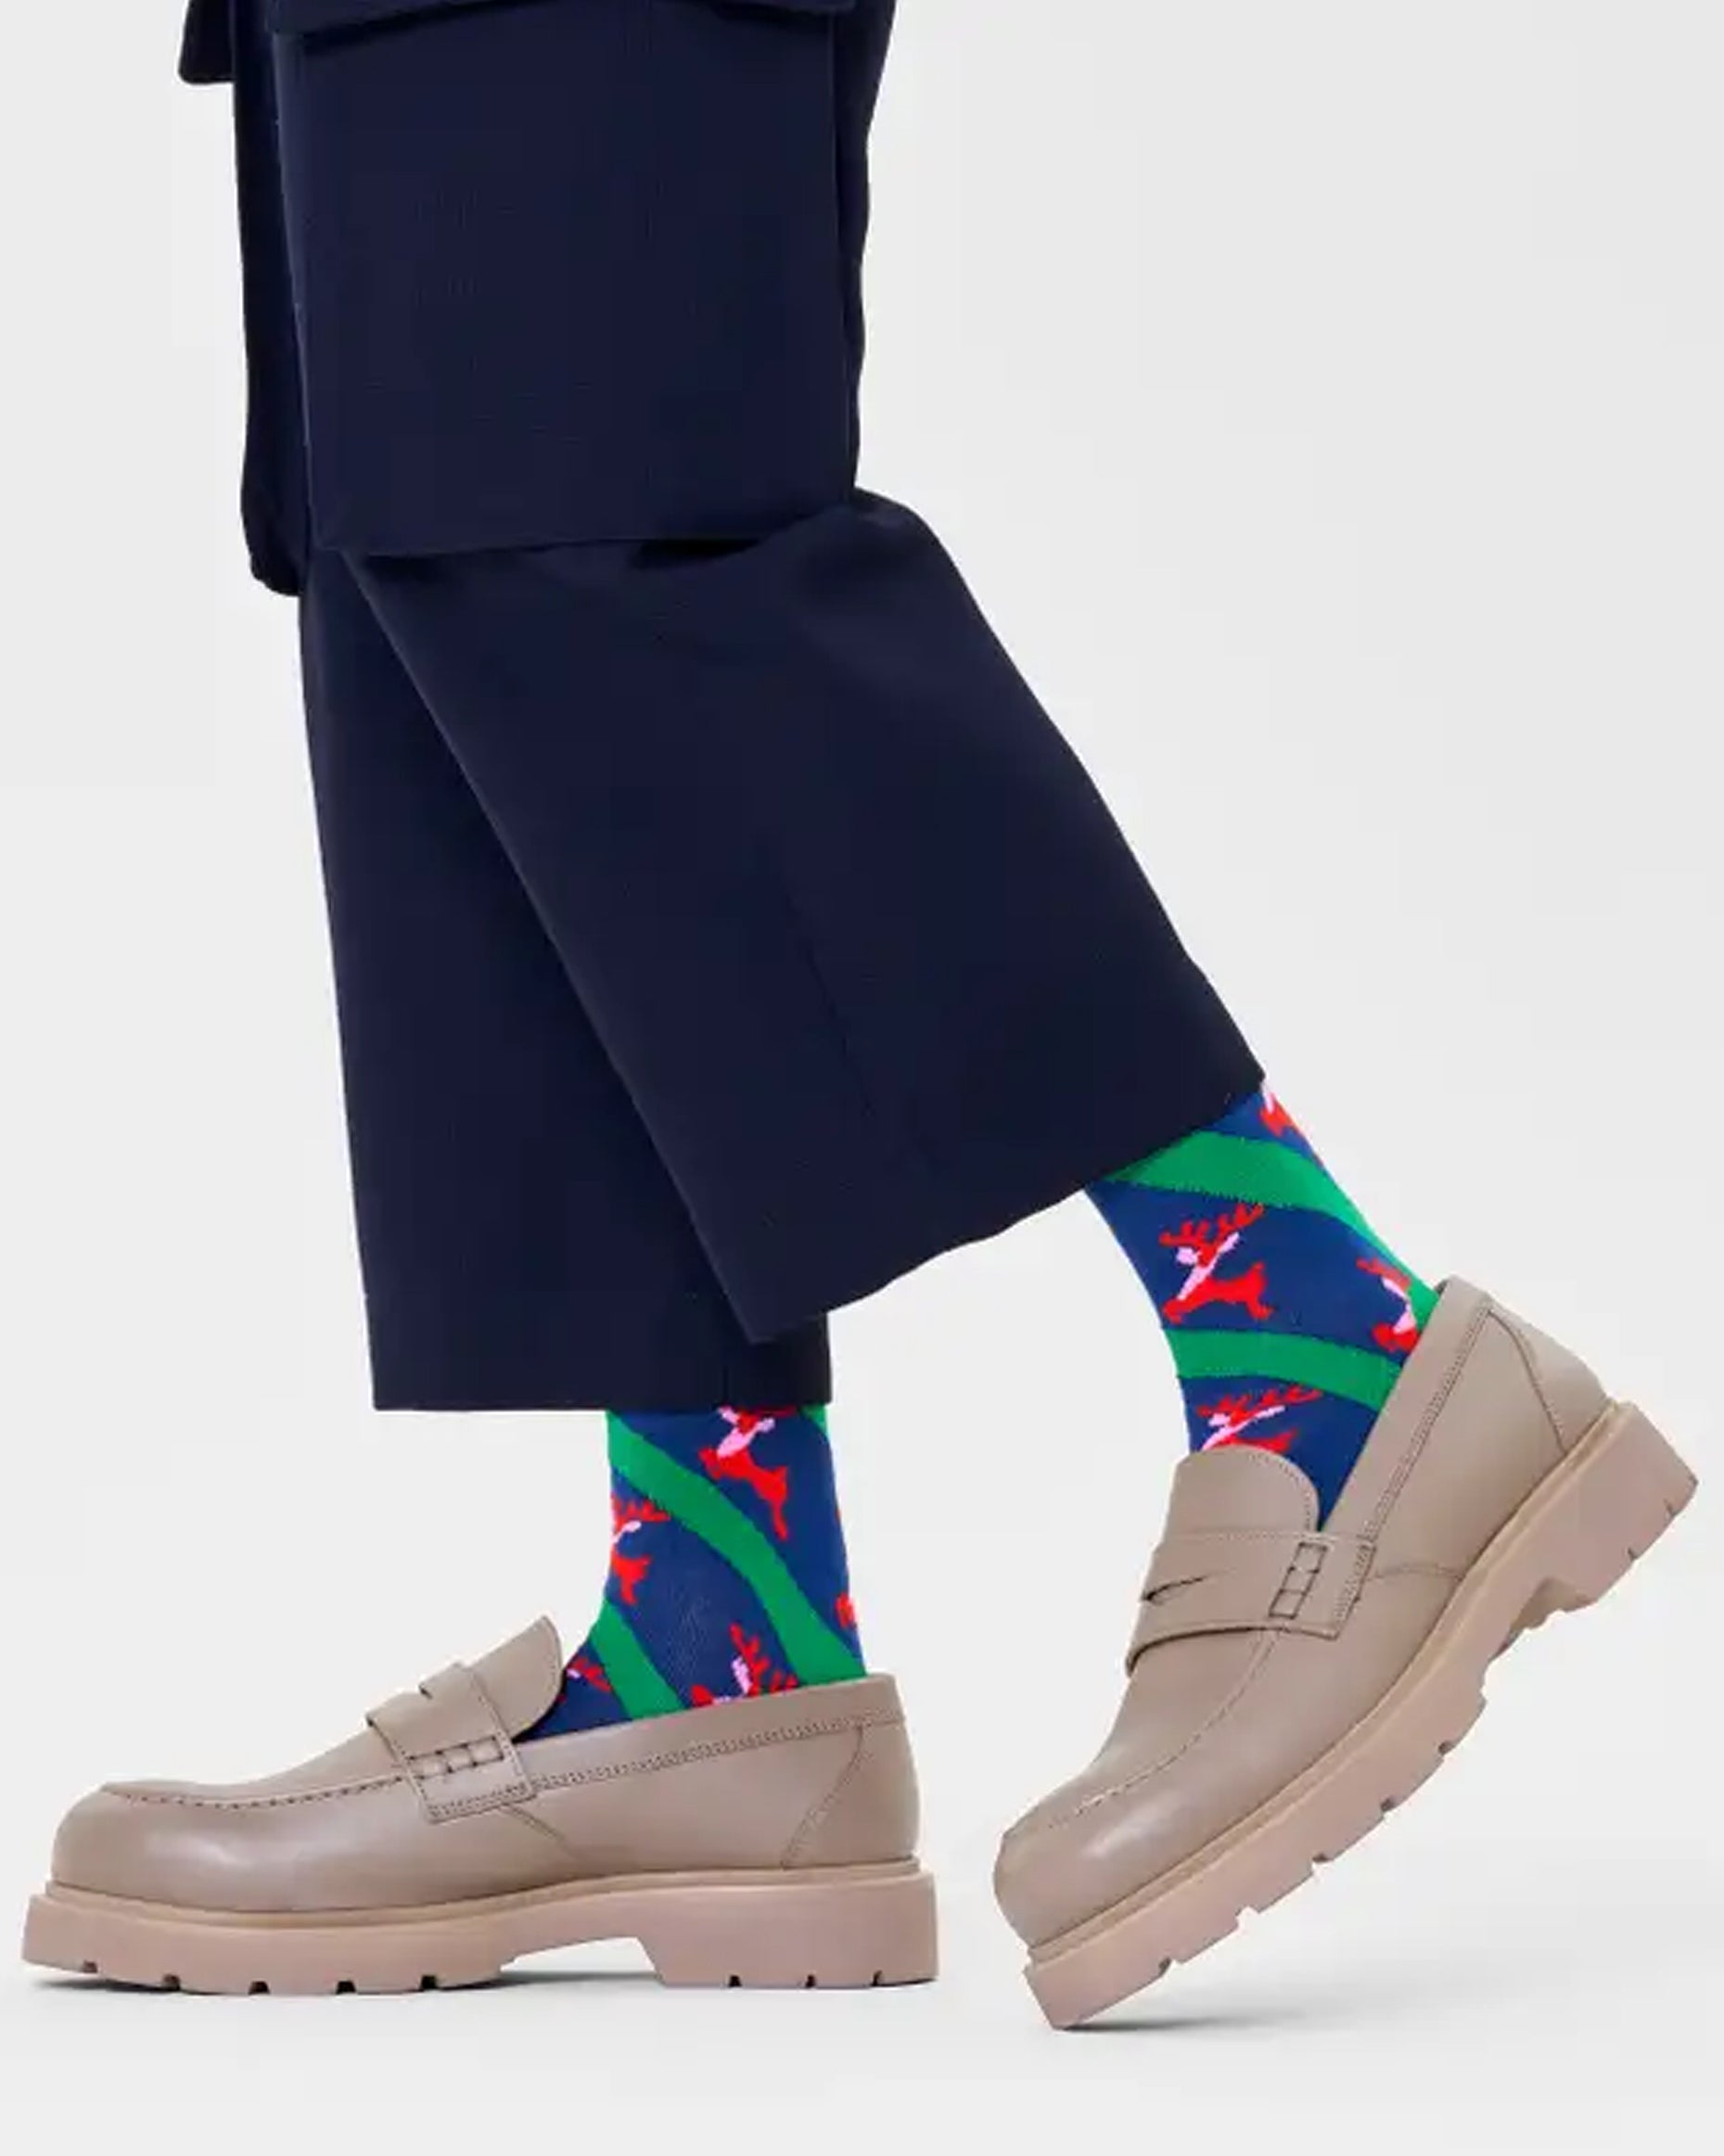 Happy Socks P000264 Reindeer Socks - Navy blue cotton crew length socks with green diagonal stripes and red reindeers pattern, green toe, heel and cuff. Worn with navy cropped pants and chunky beige loafers.